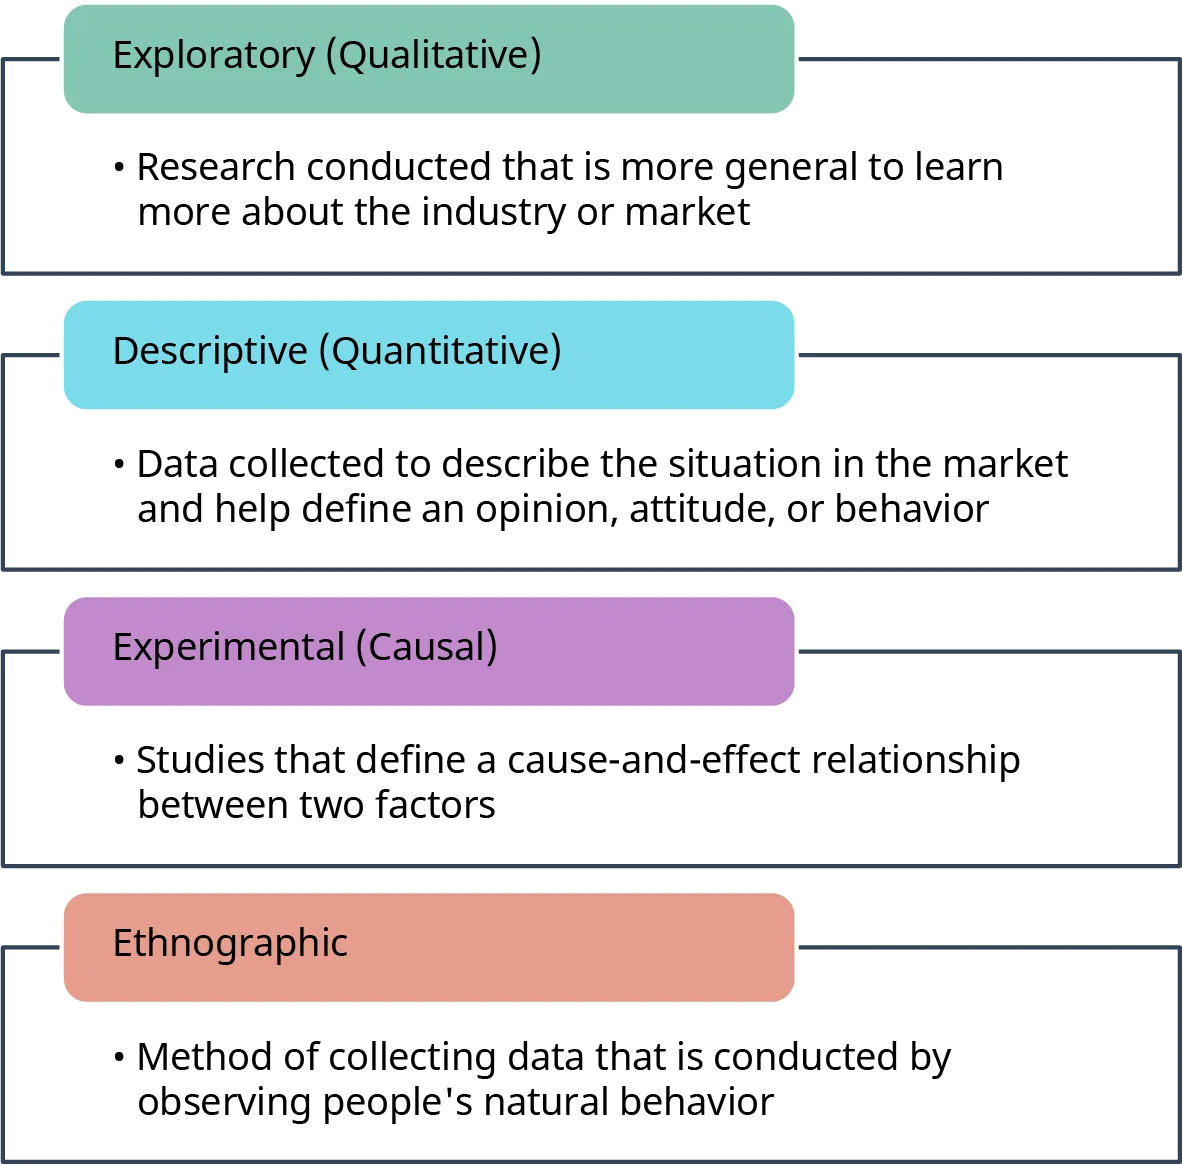 The four research types are exploratory or qualitative, descriptive or quantitative, experimental or causal, and ethnographic. Exploratory is research conducted that is more general to learn more about the industry or market. Descriptive is data collected to describe the situation in the market and help define an opinion, attitude, or behavior. Experimental is studies that define a cause-and-effect relationship between two factors. Ethnographic is a method of collecting data that is conducted by observing people's natural behavior.